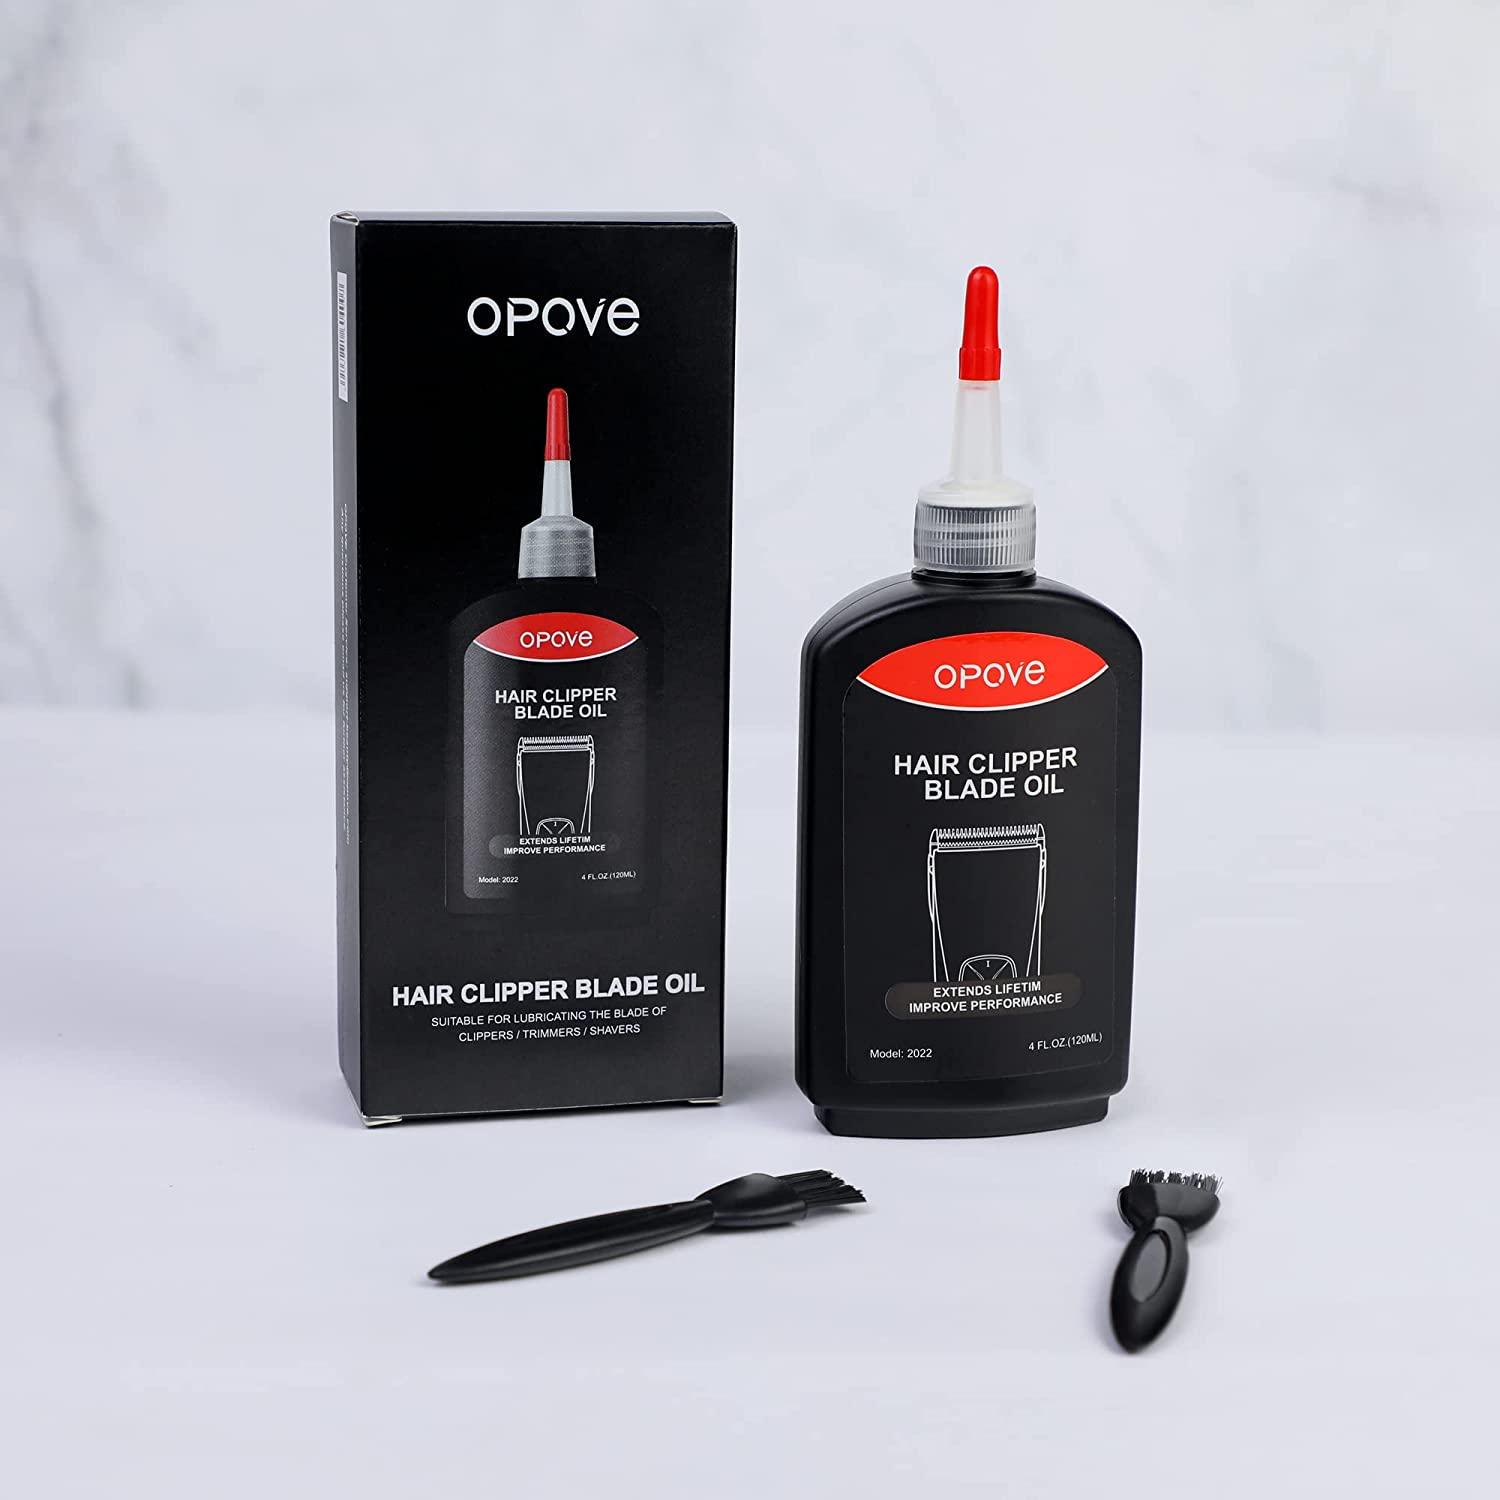 OPOVE Premium Hair Clipper Blade Lubricating Oil for Clippers, Trimmers,  Groomers, Rust Prevention, 4.05oz/120ml, 1 Pack